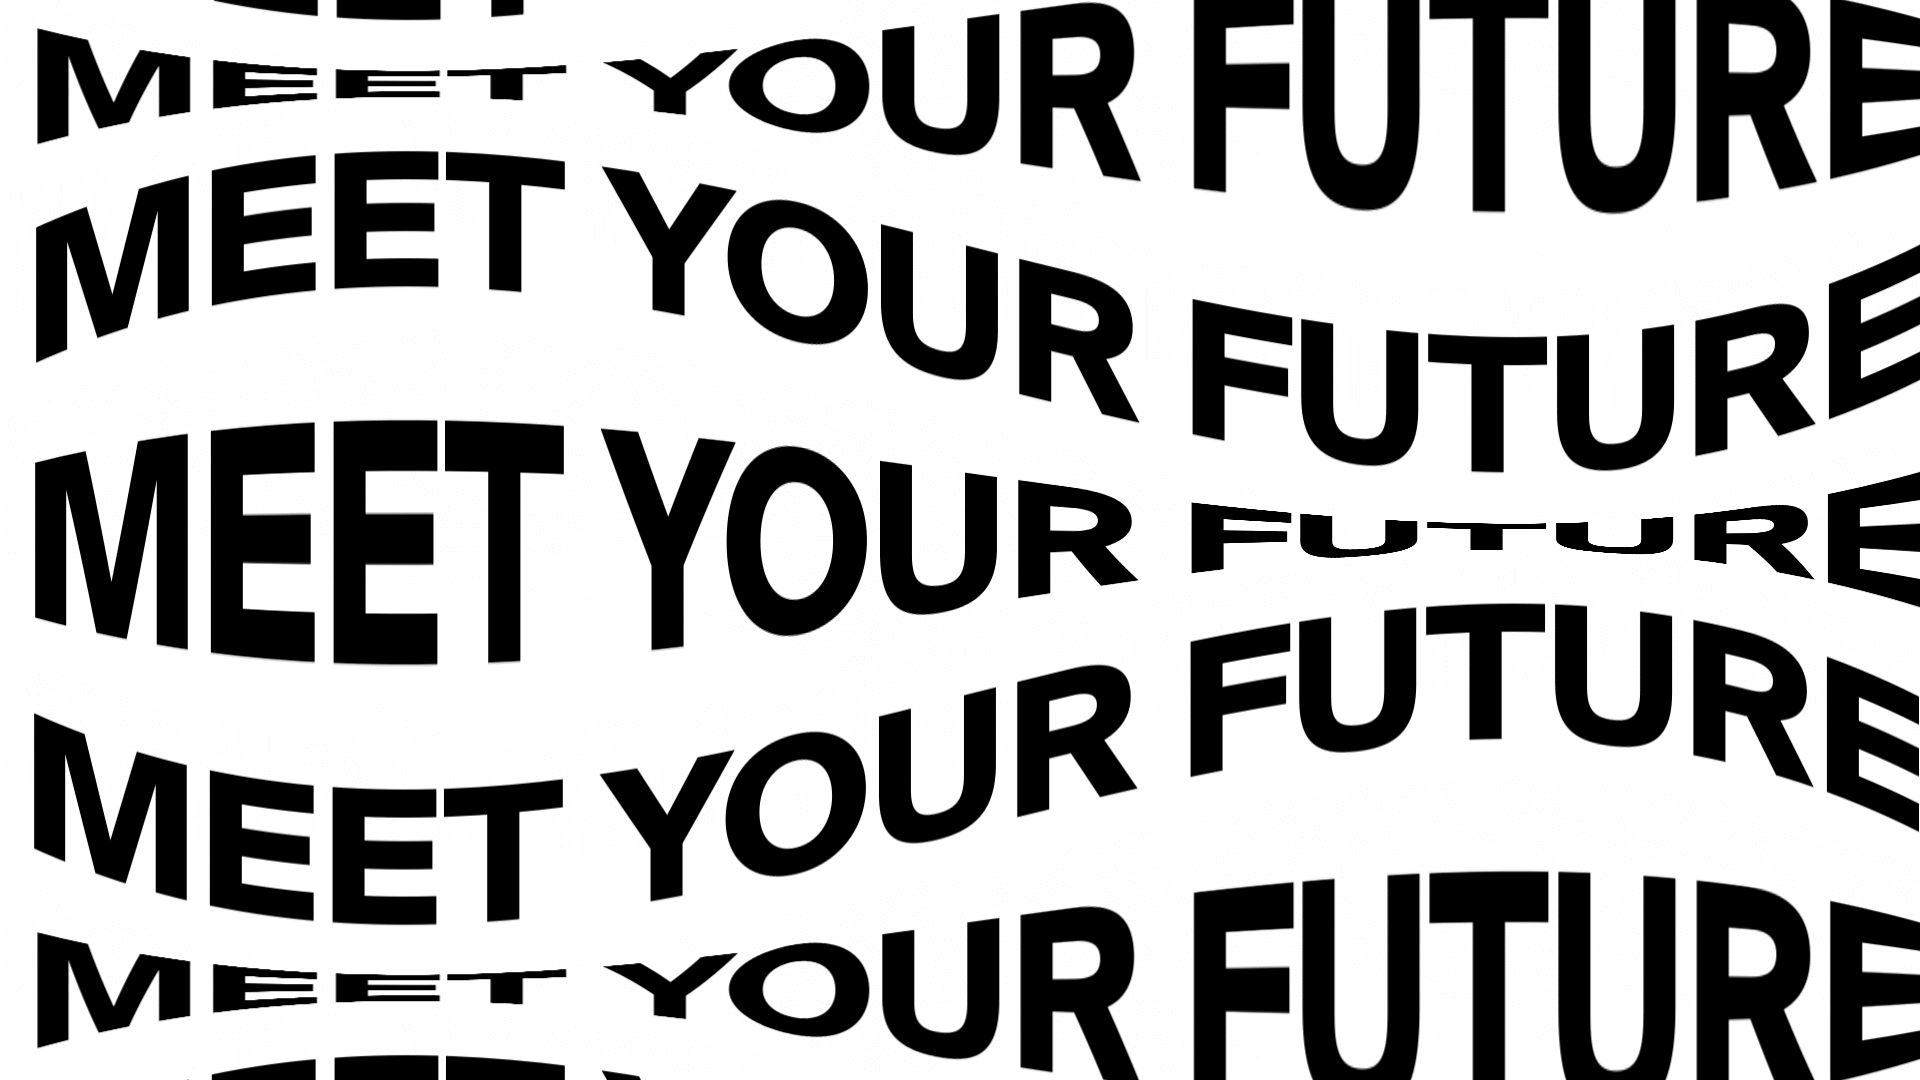 Meet Your Future: Kinetic Typography kinetic typography motion motion graphics